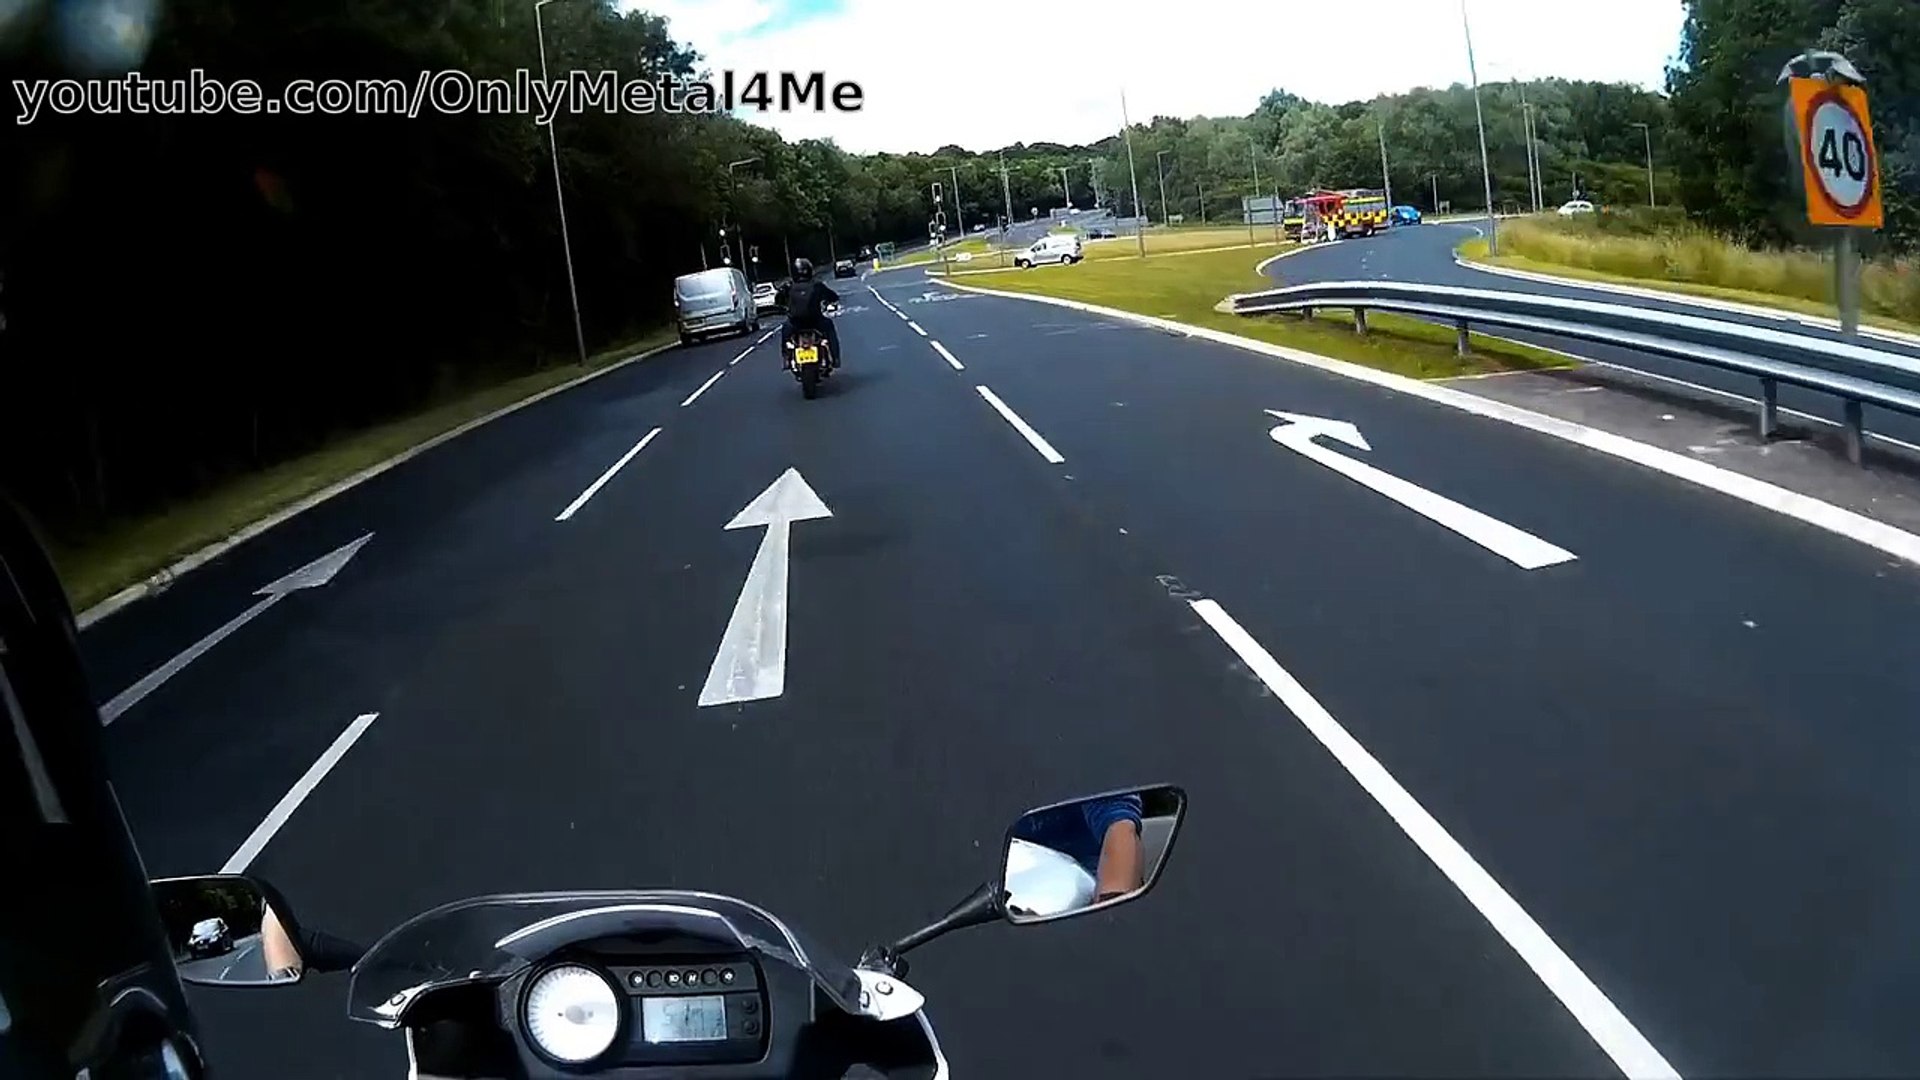 Motorcycle crash into Harley Davidson and a traffic light